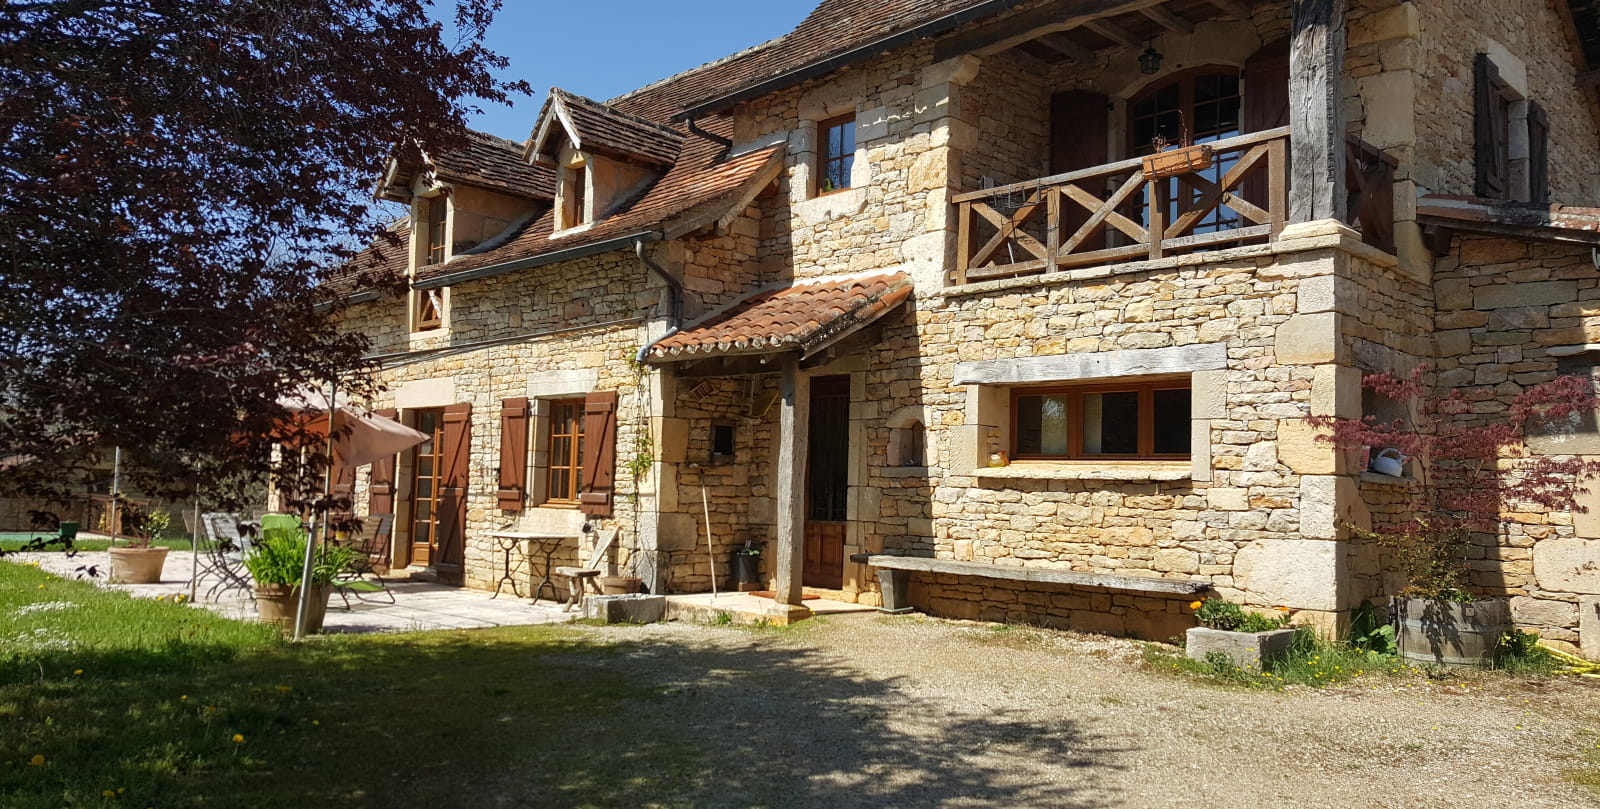 The Quercy house.